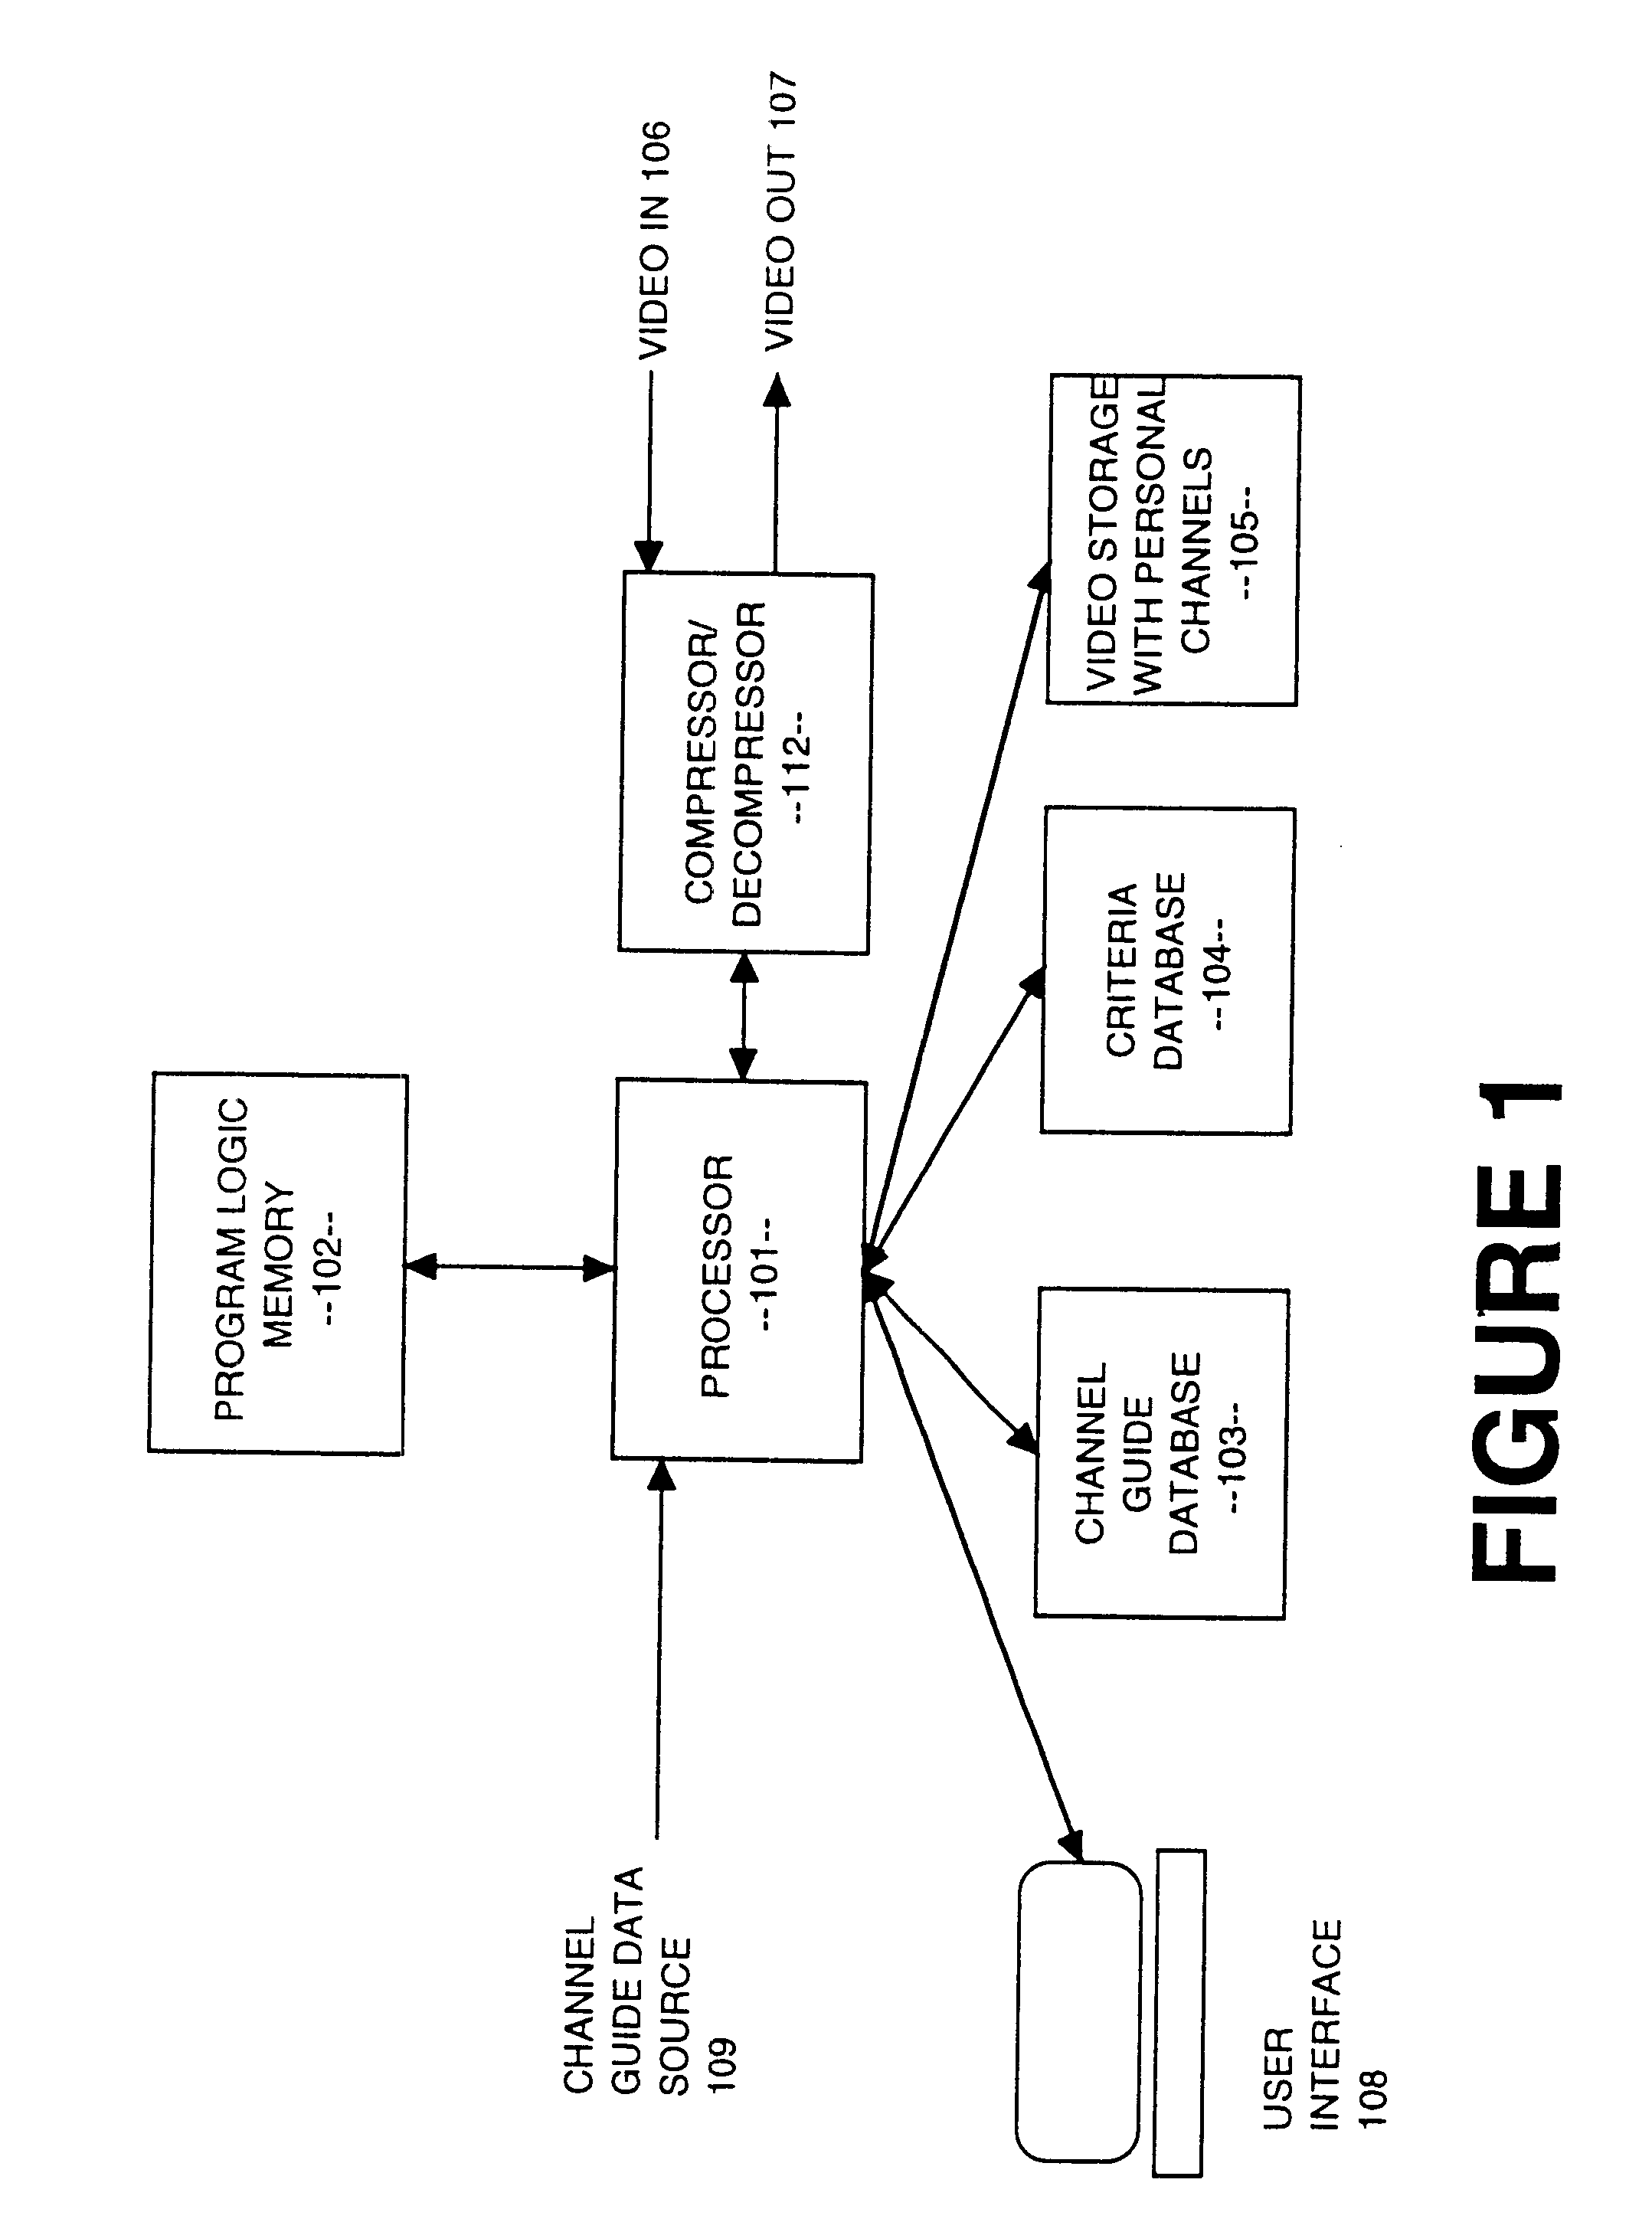 Method and apparatus for fast forwarding and rewinding in a video recording device